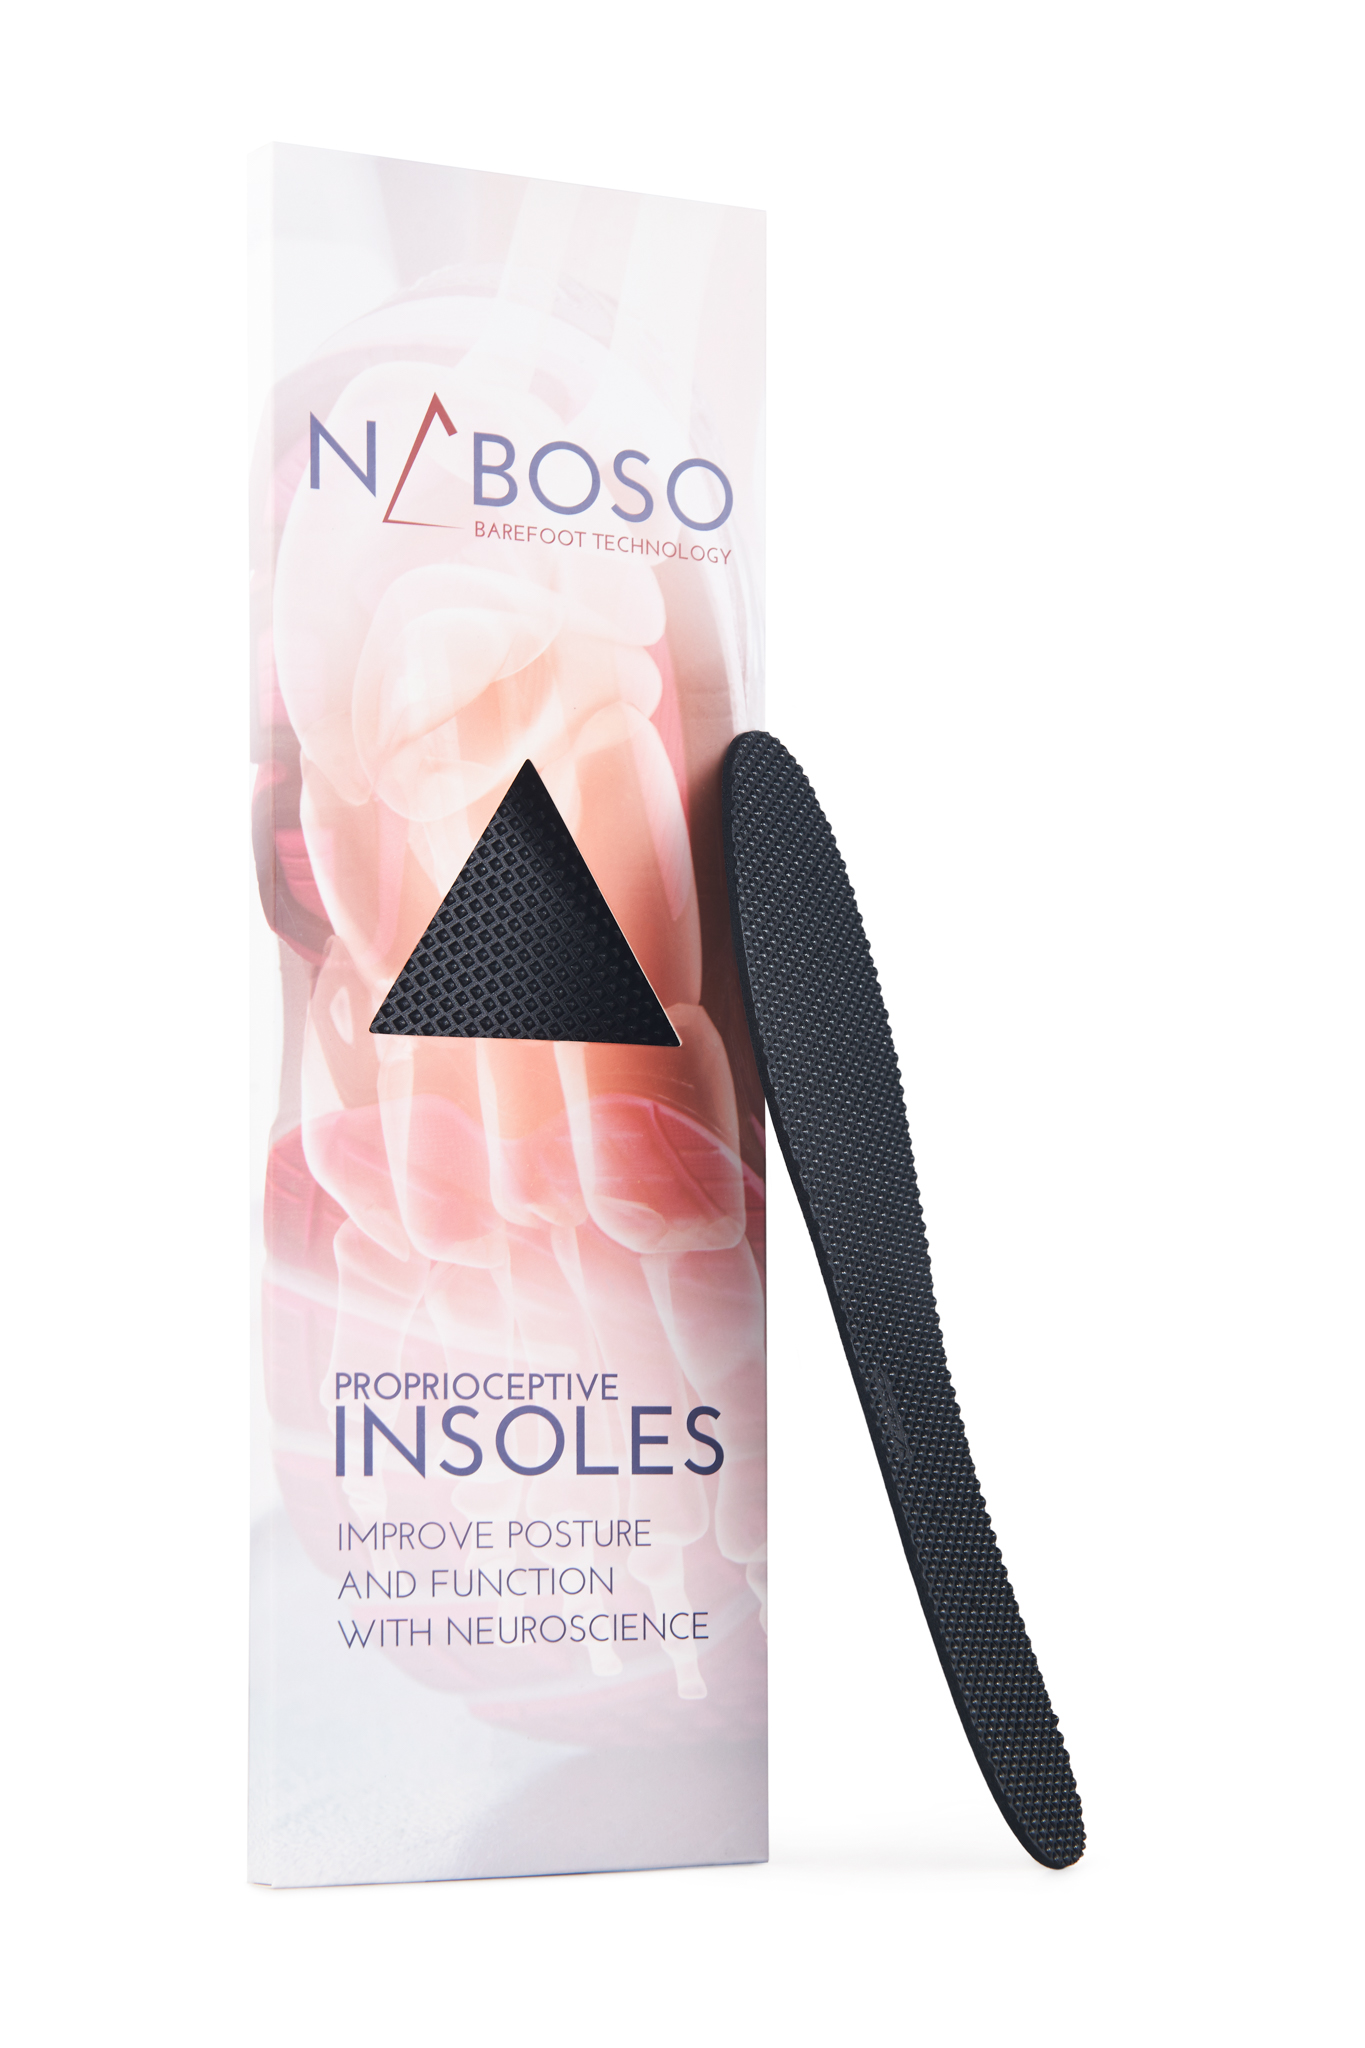 NABOSO Insoles 1.5mm